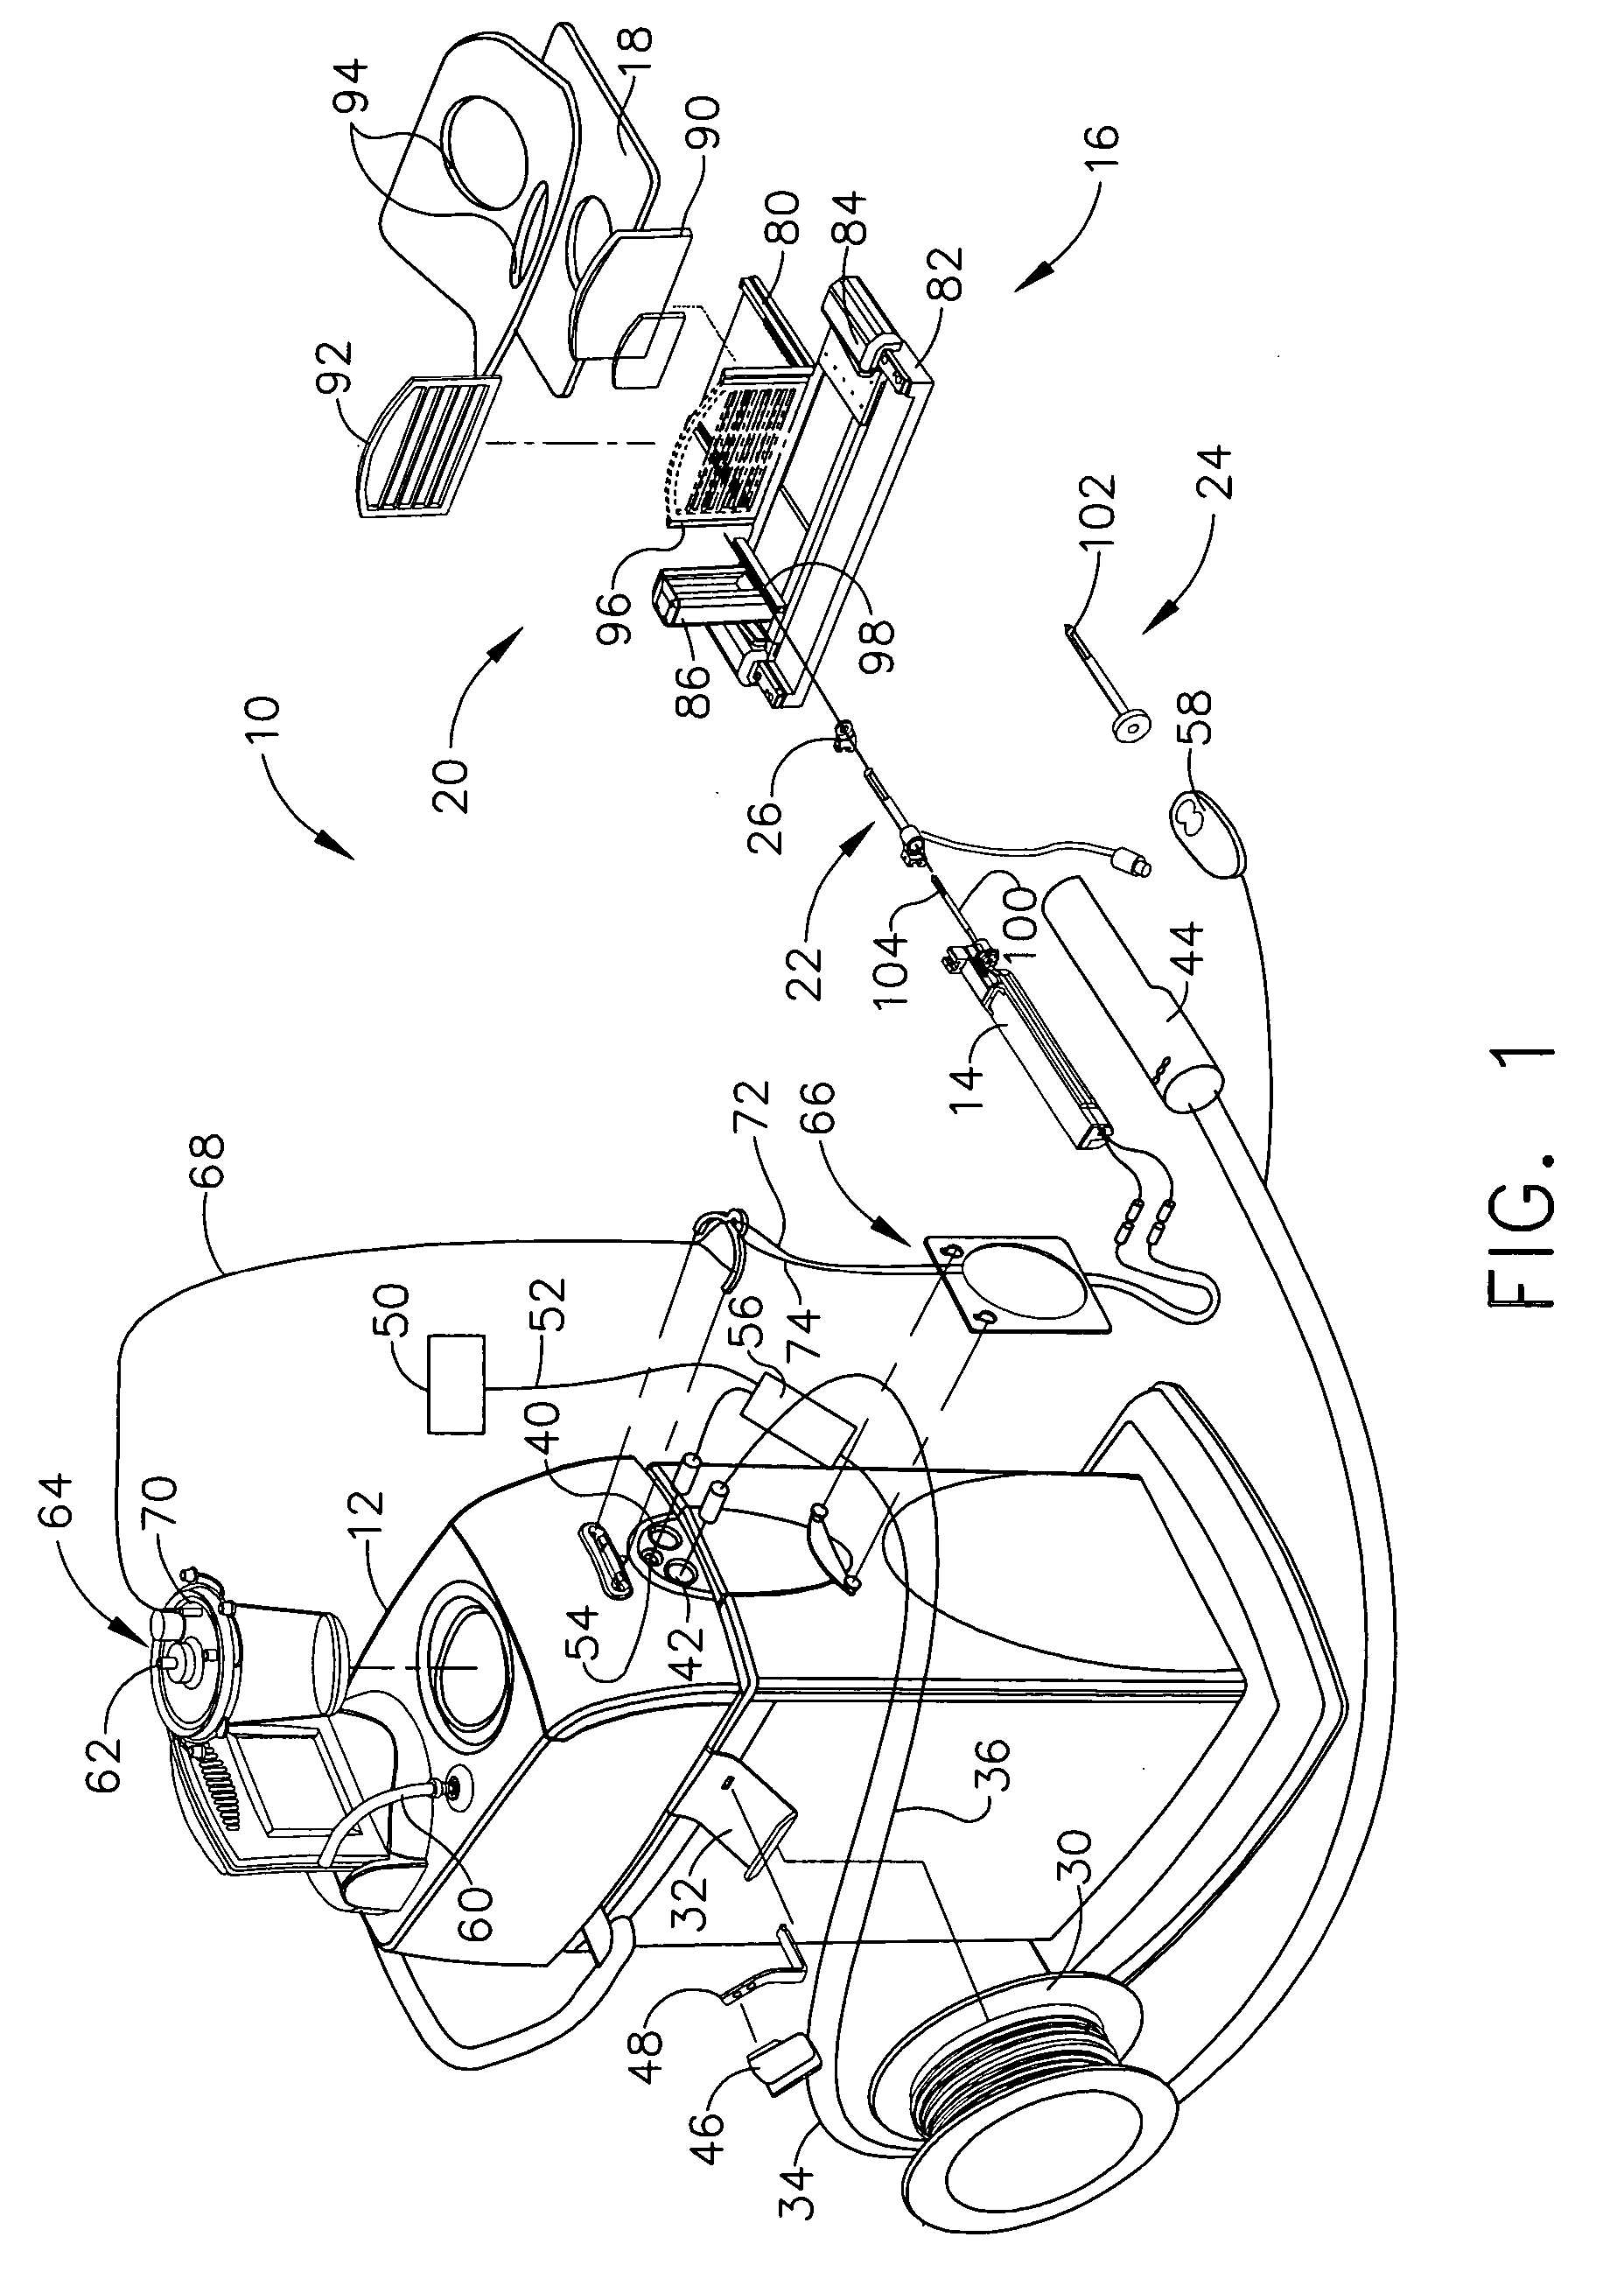 MRI biopsy apparatus incorporating an imageable penetrating portion